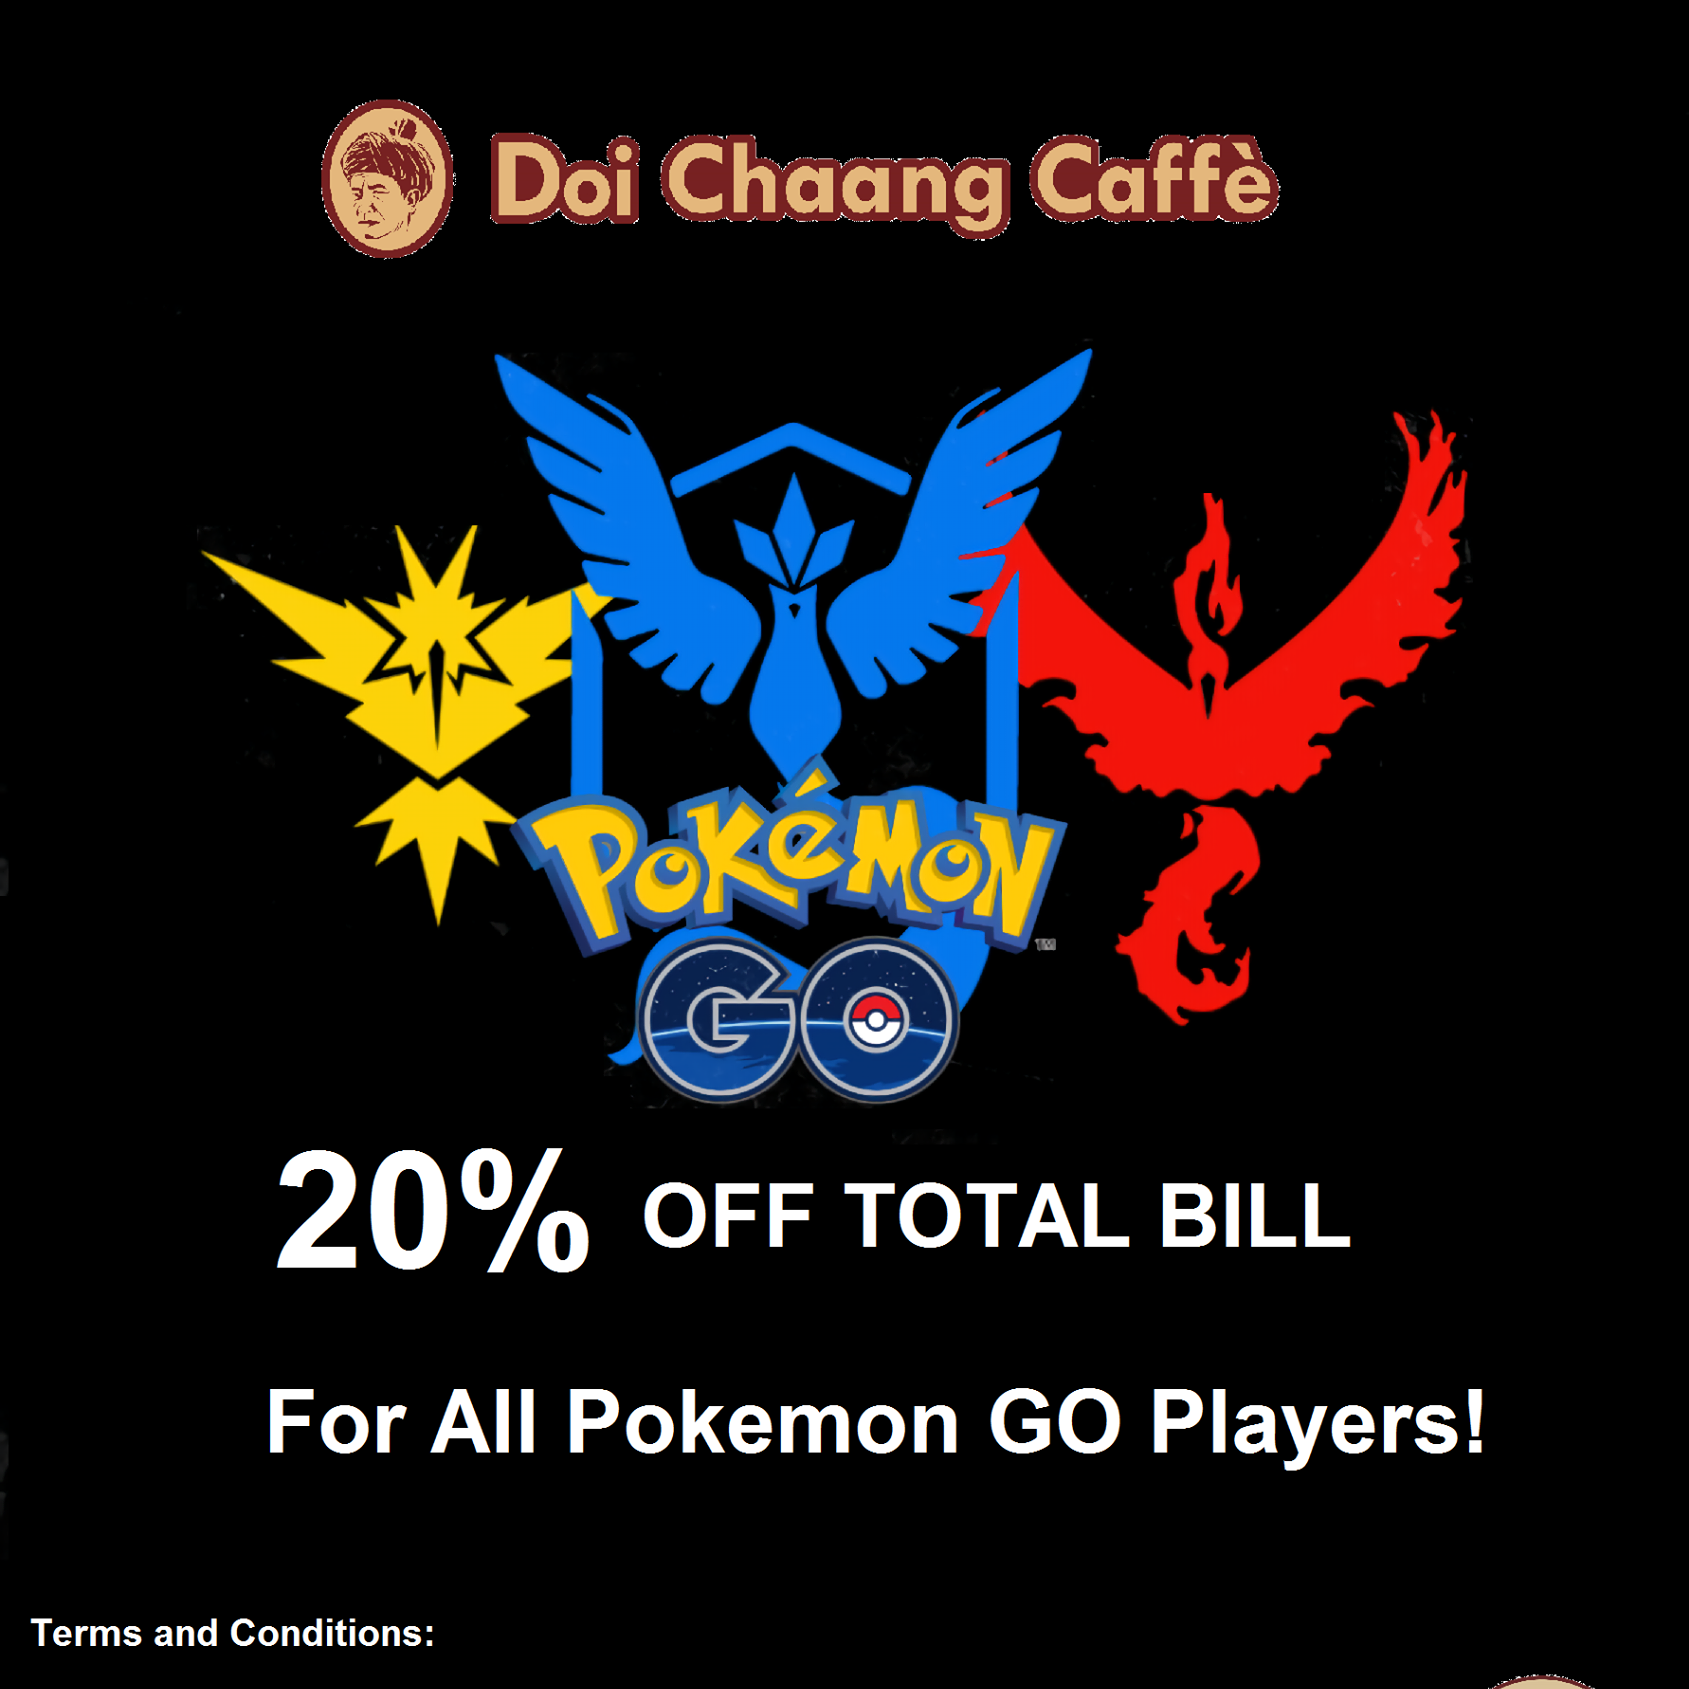 Doi Chaang Caffè 20% Off for Pokemon GO Players Singapore Promotion ends 31 Aug 2016